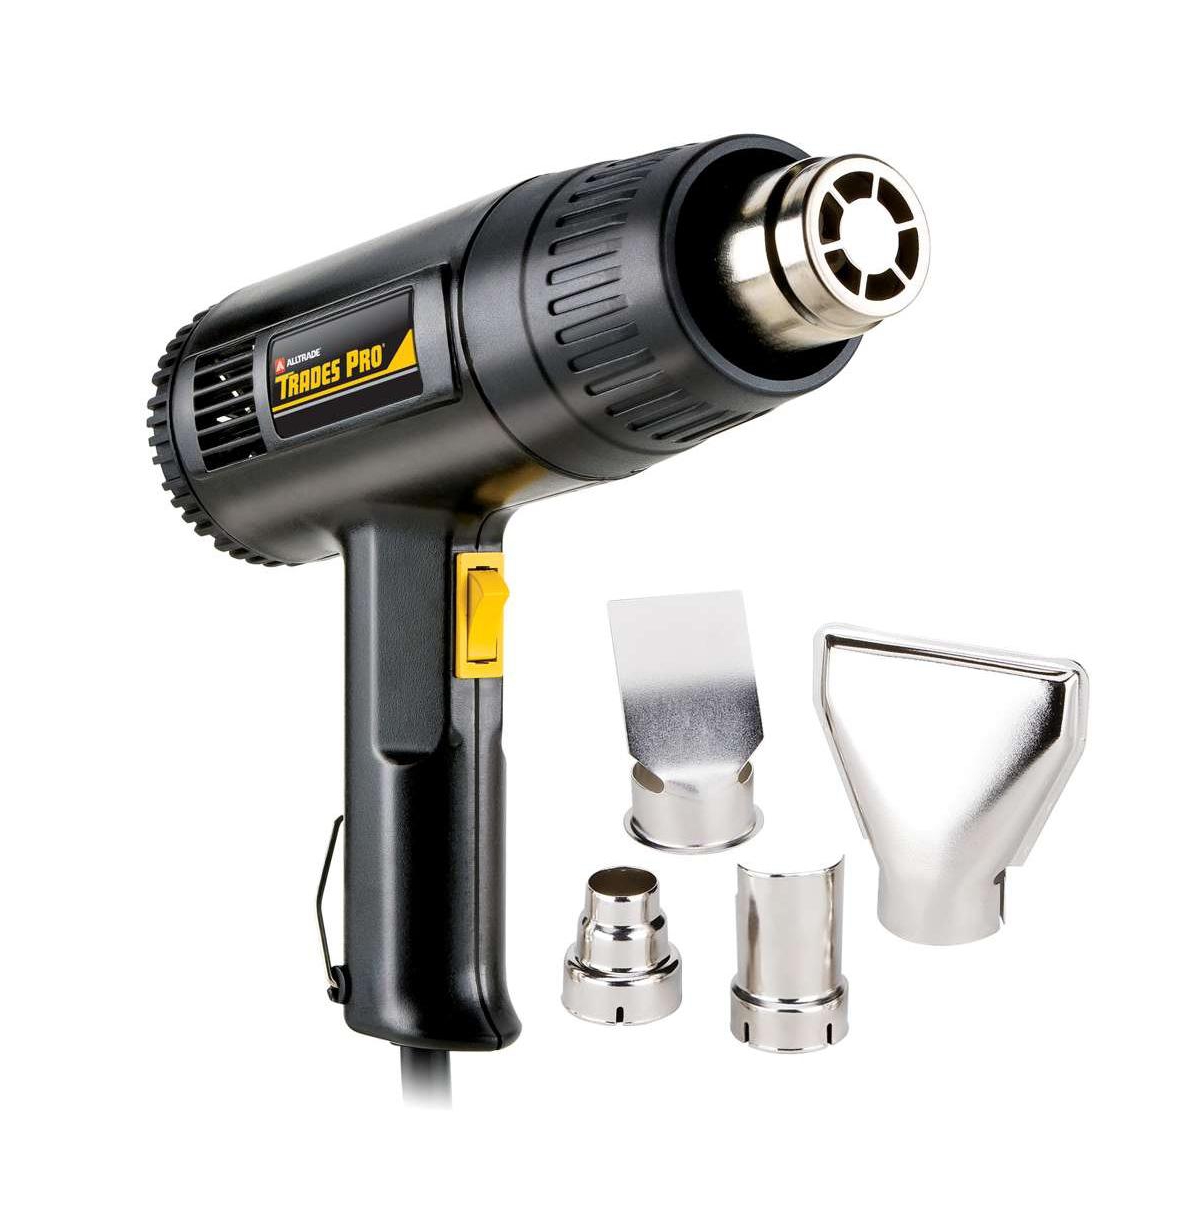 Heat Gun with 4 Nozzle Adapters - Black